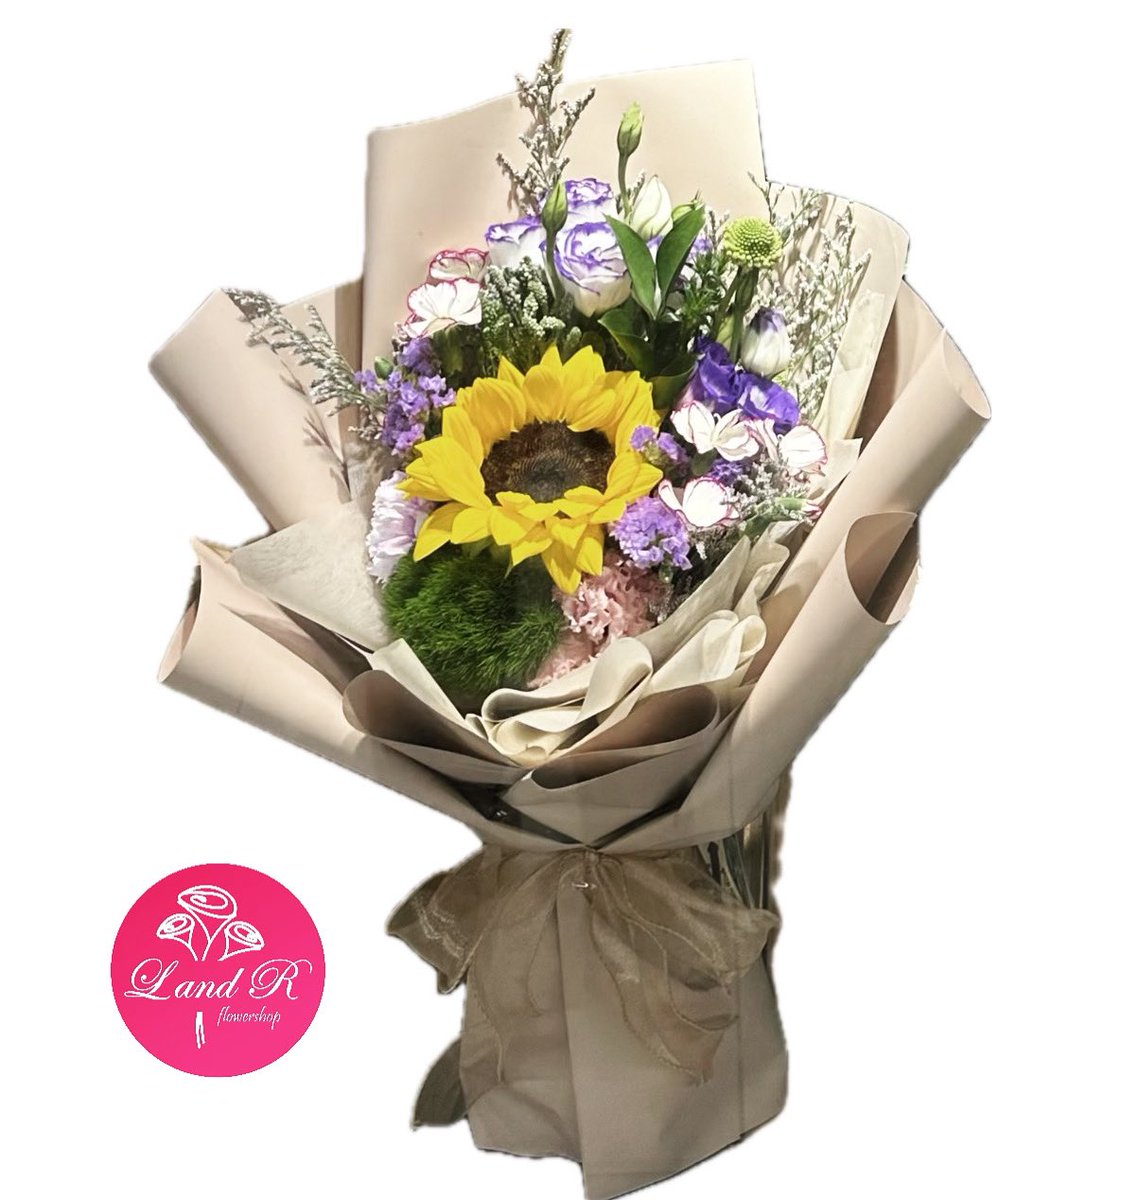 Sunflower with carnation cluster

Send us a message to order or call us at 

📞0998-945-1133 
📞0916-664-0707

Looking for more? You may visit our website 👇

facebook.com/landrflowersho…

#Flowers #FlowerArrangement #FlowerBouquet #LNRFlowerShop #wedeliver🚐🚙